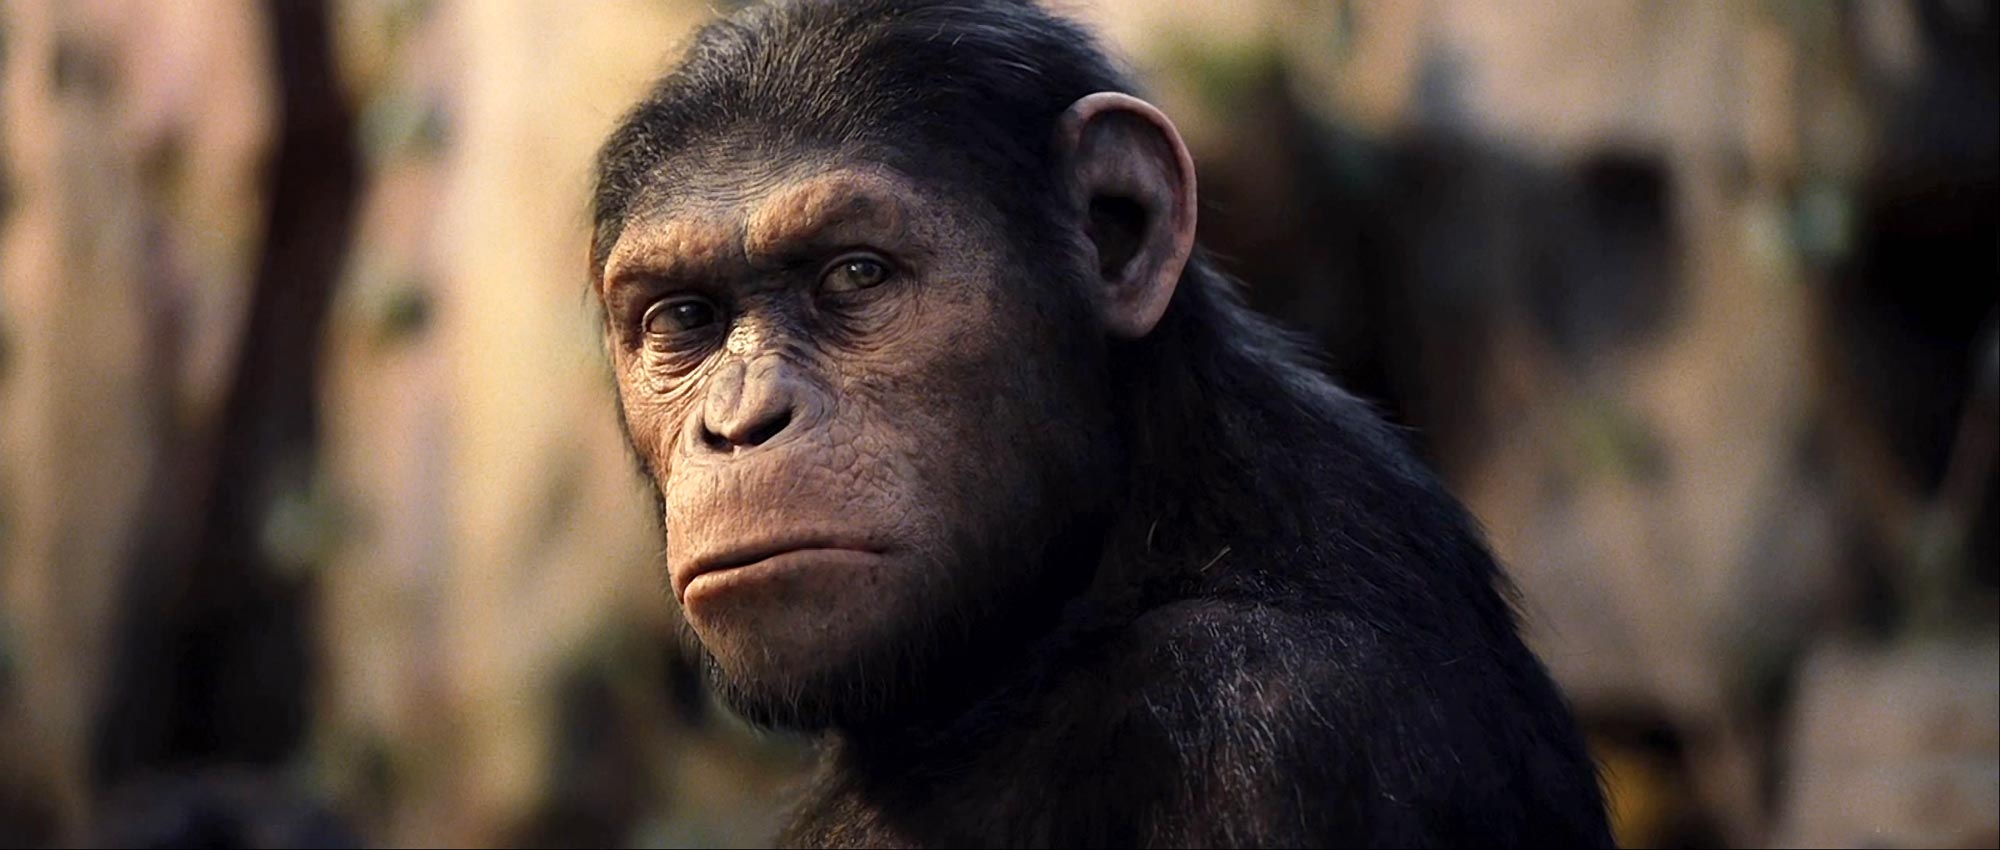 Rise of the Planet of the Apes (2011) 15 – rise of the planet of the apes 10